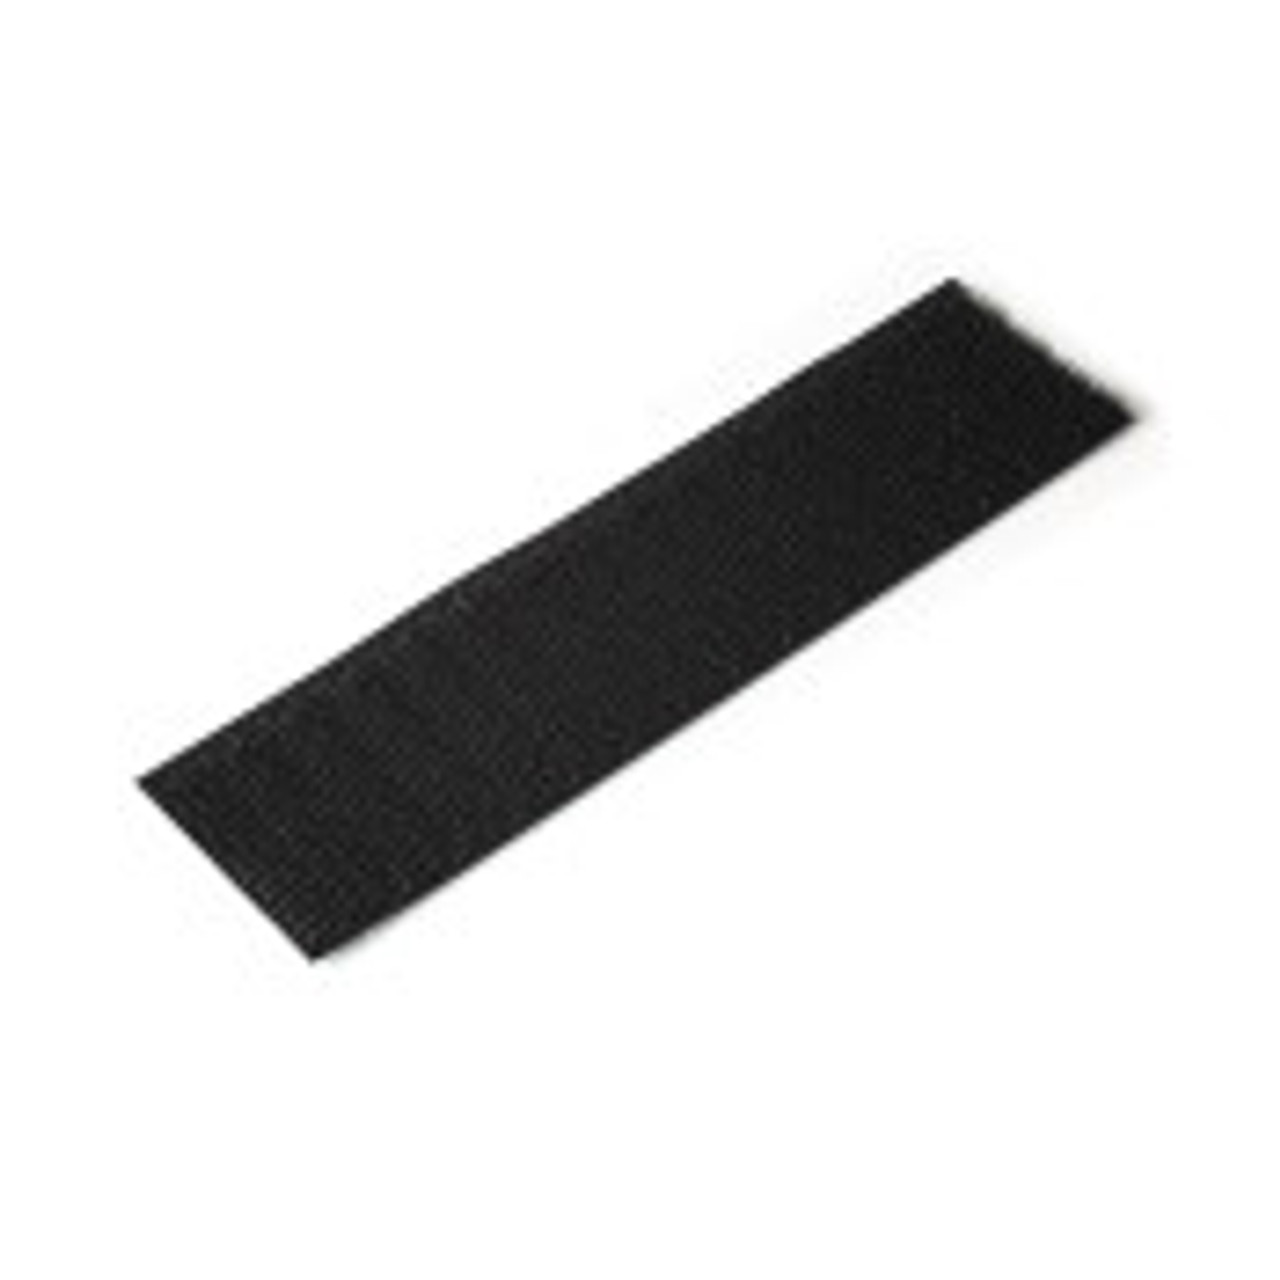 Velcro Tape Sew-on (Hook and Loop) 2 inch – Tarps & Tie-Downs